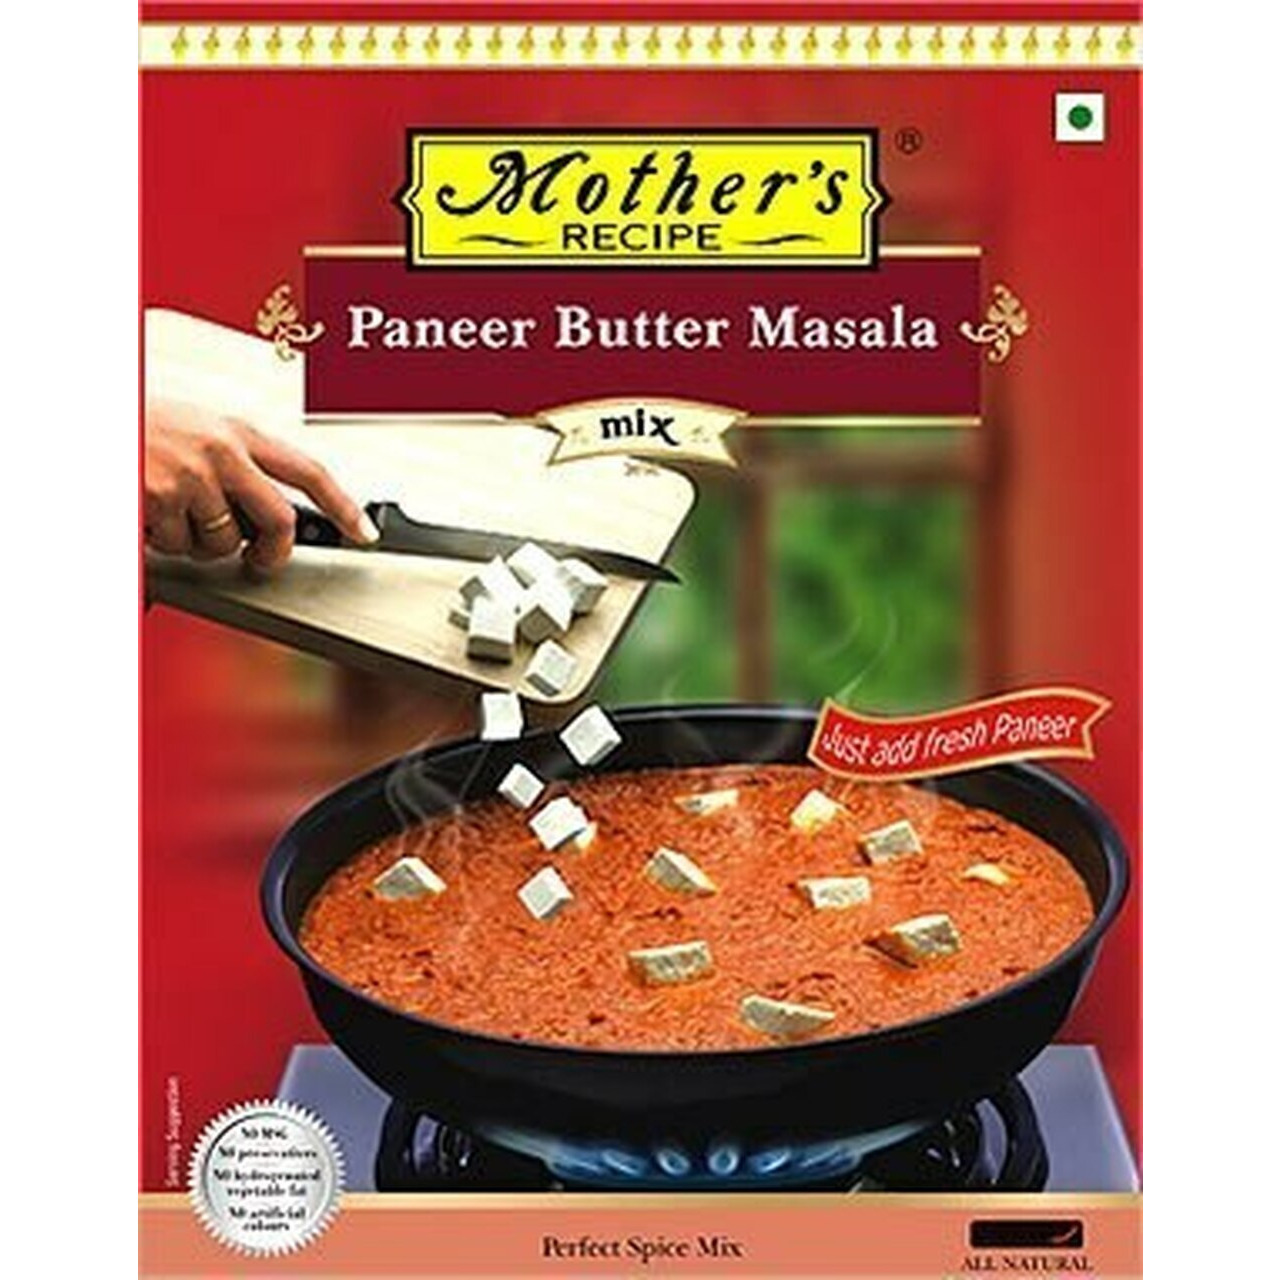 Pack of 5 - Mother's Recipe Paneer Butter Masala - 75 Gm (2.6 Oz)